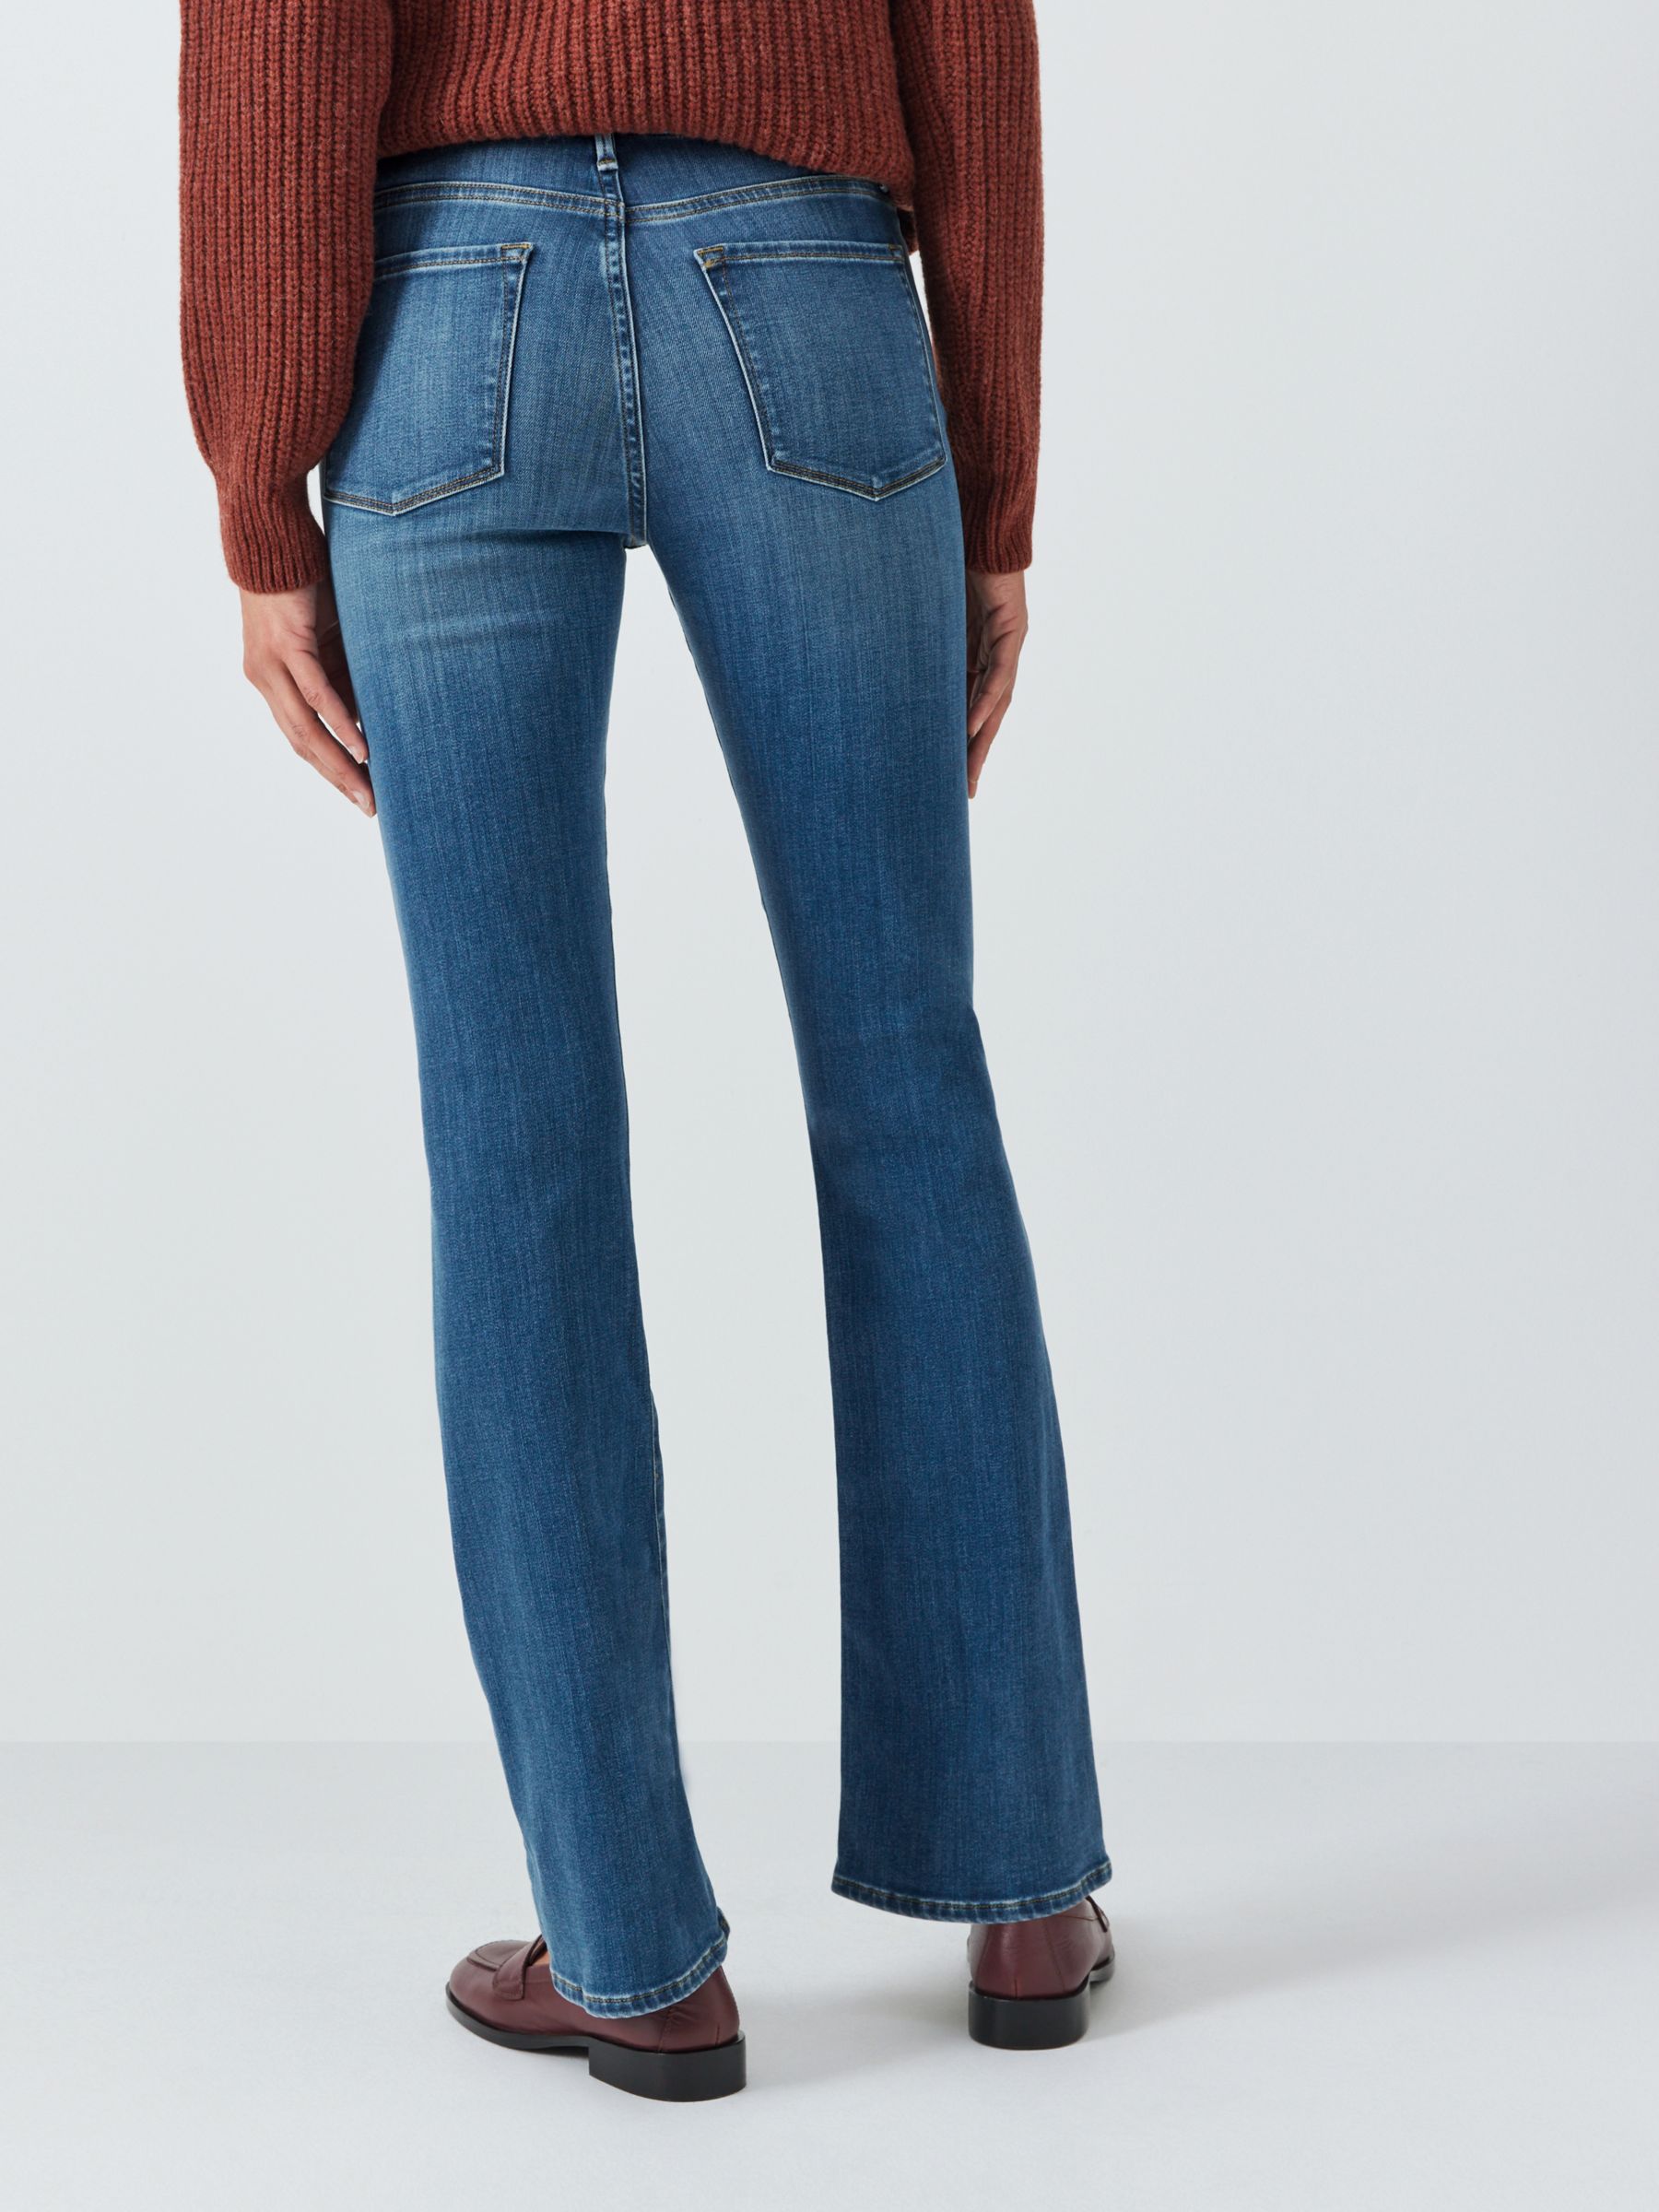 Buy FRAME Le Mini Bootcut Jeans, Poe Online at johnlewis.com